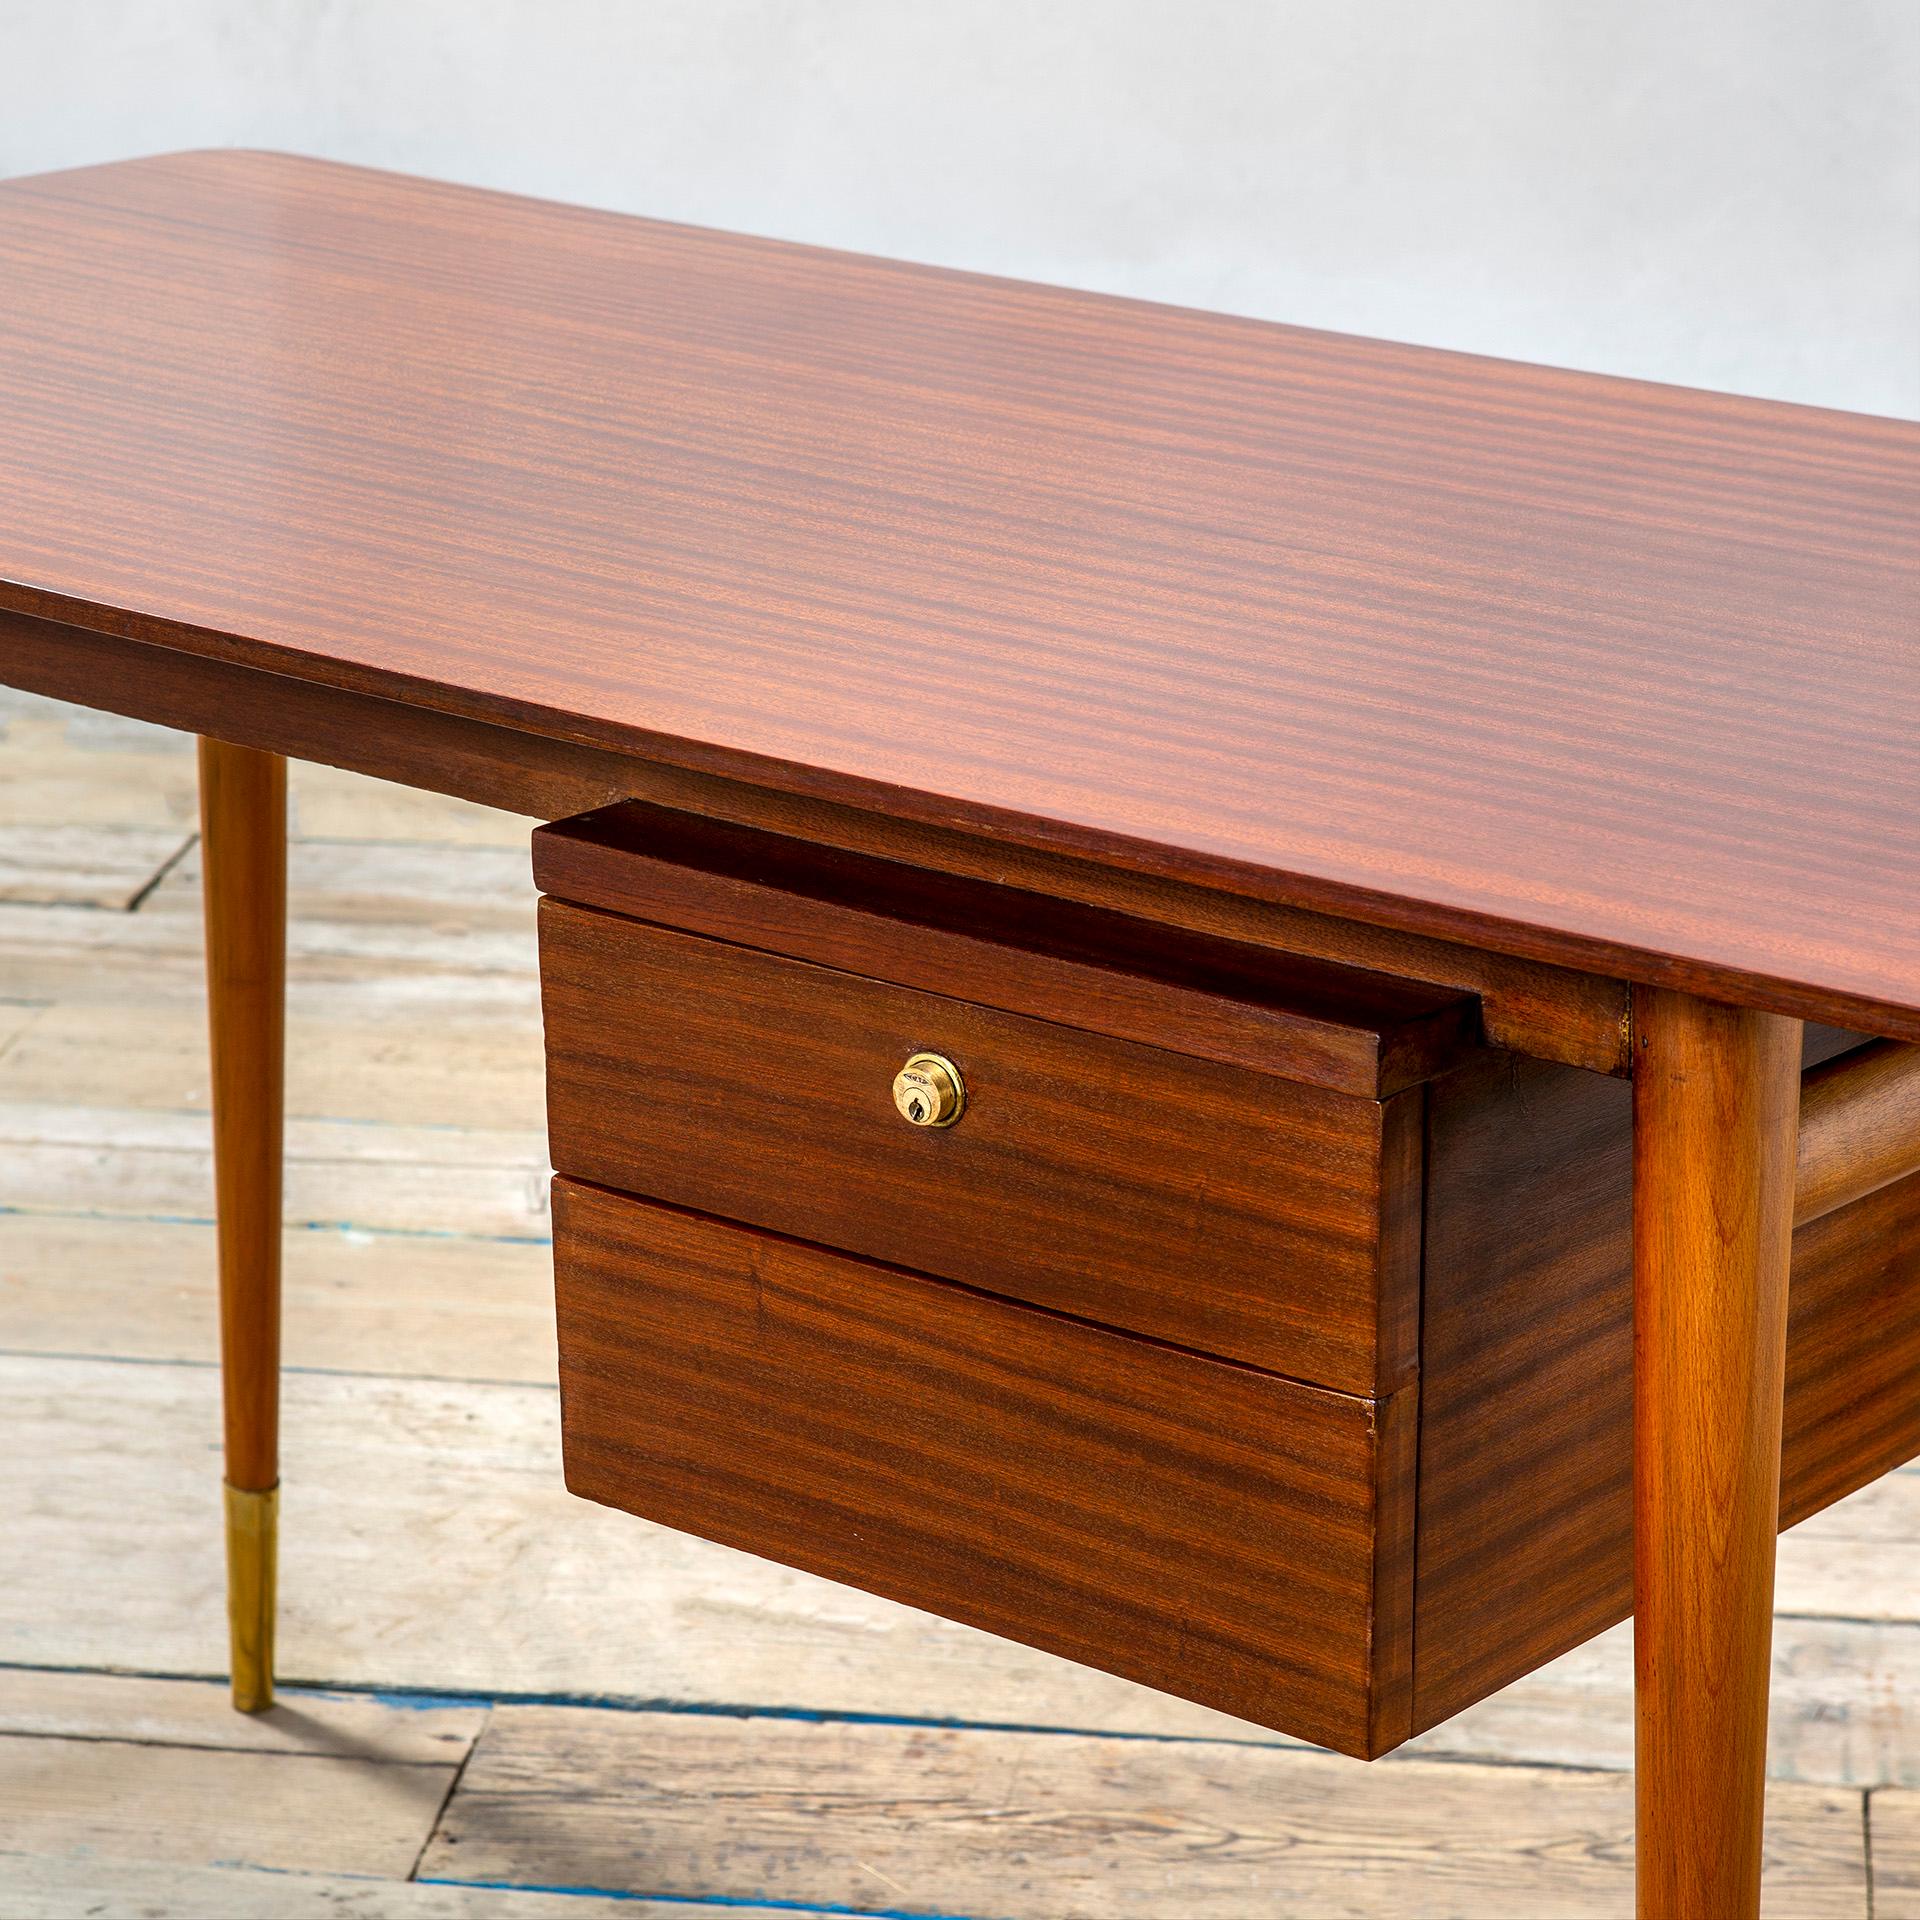 20th Century Melchiorre Bega Desk with wooden structure, drawers Brass details In Good Condition For Sale In Turin, Turin